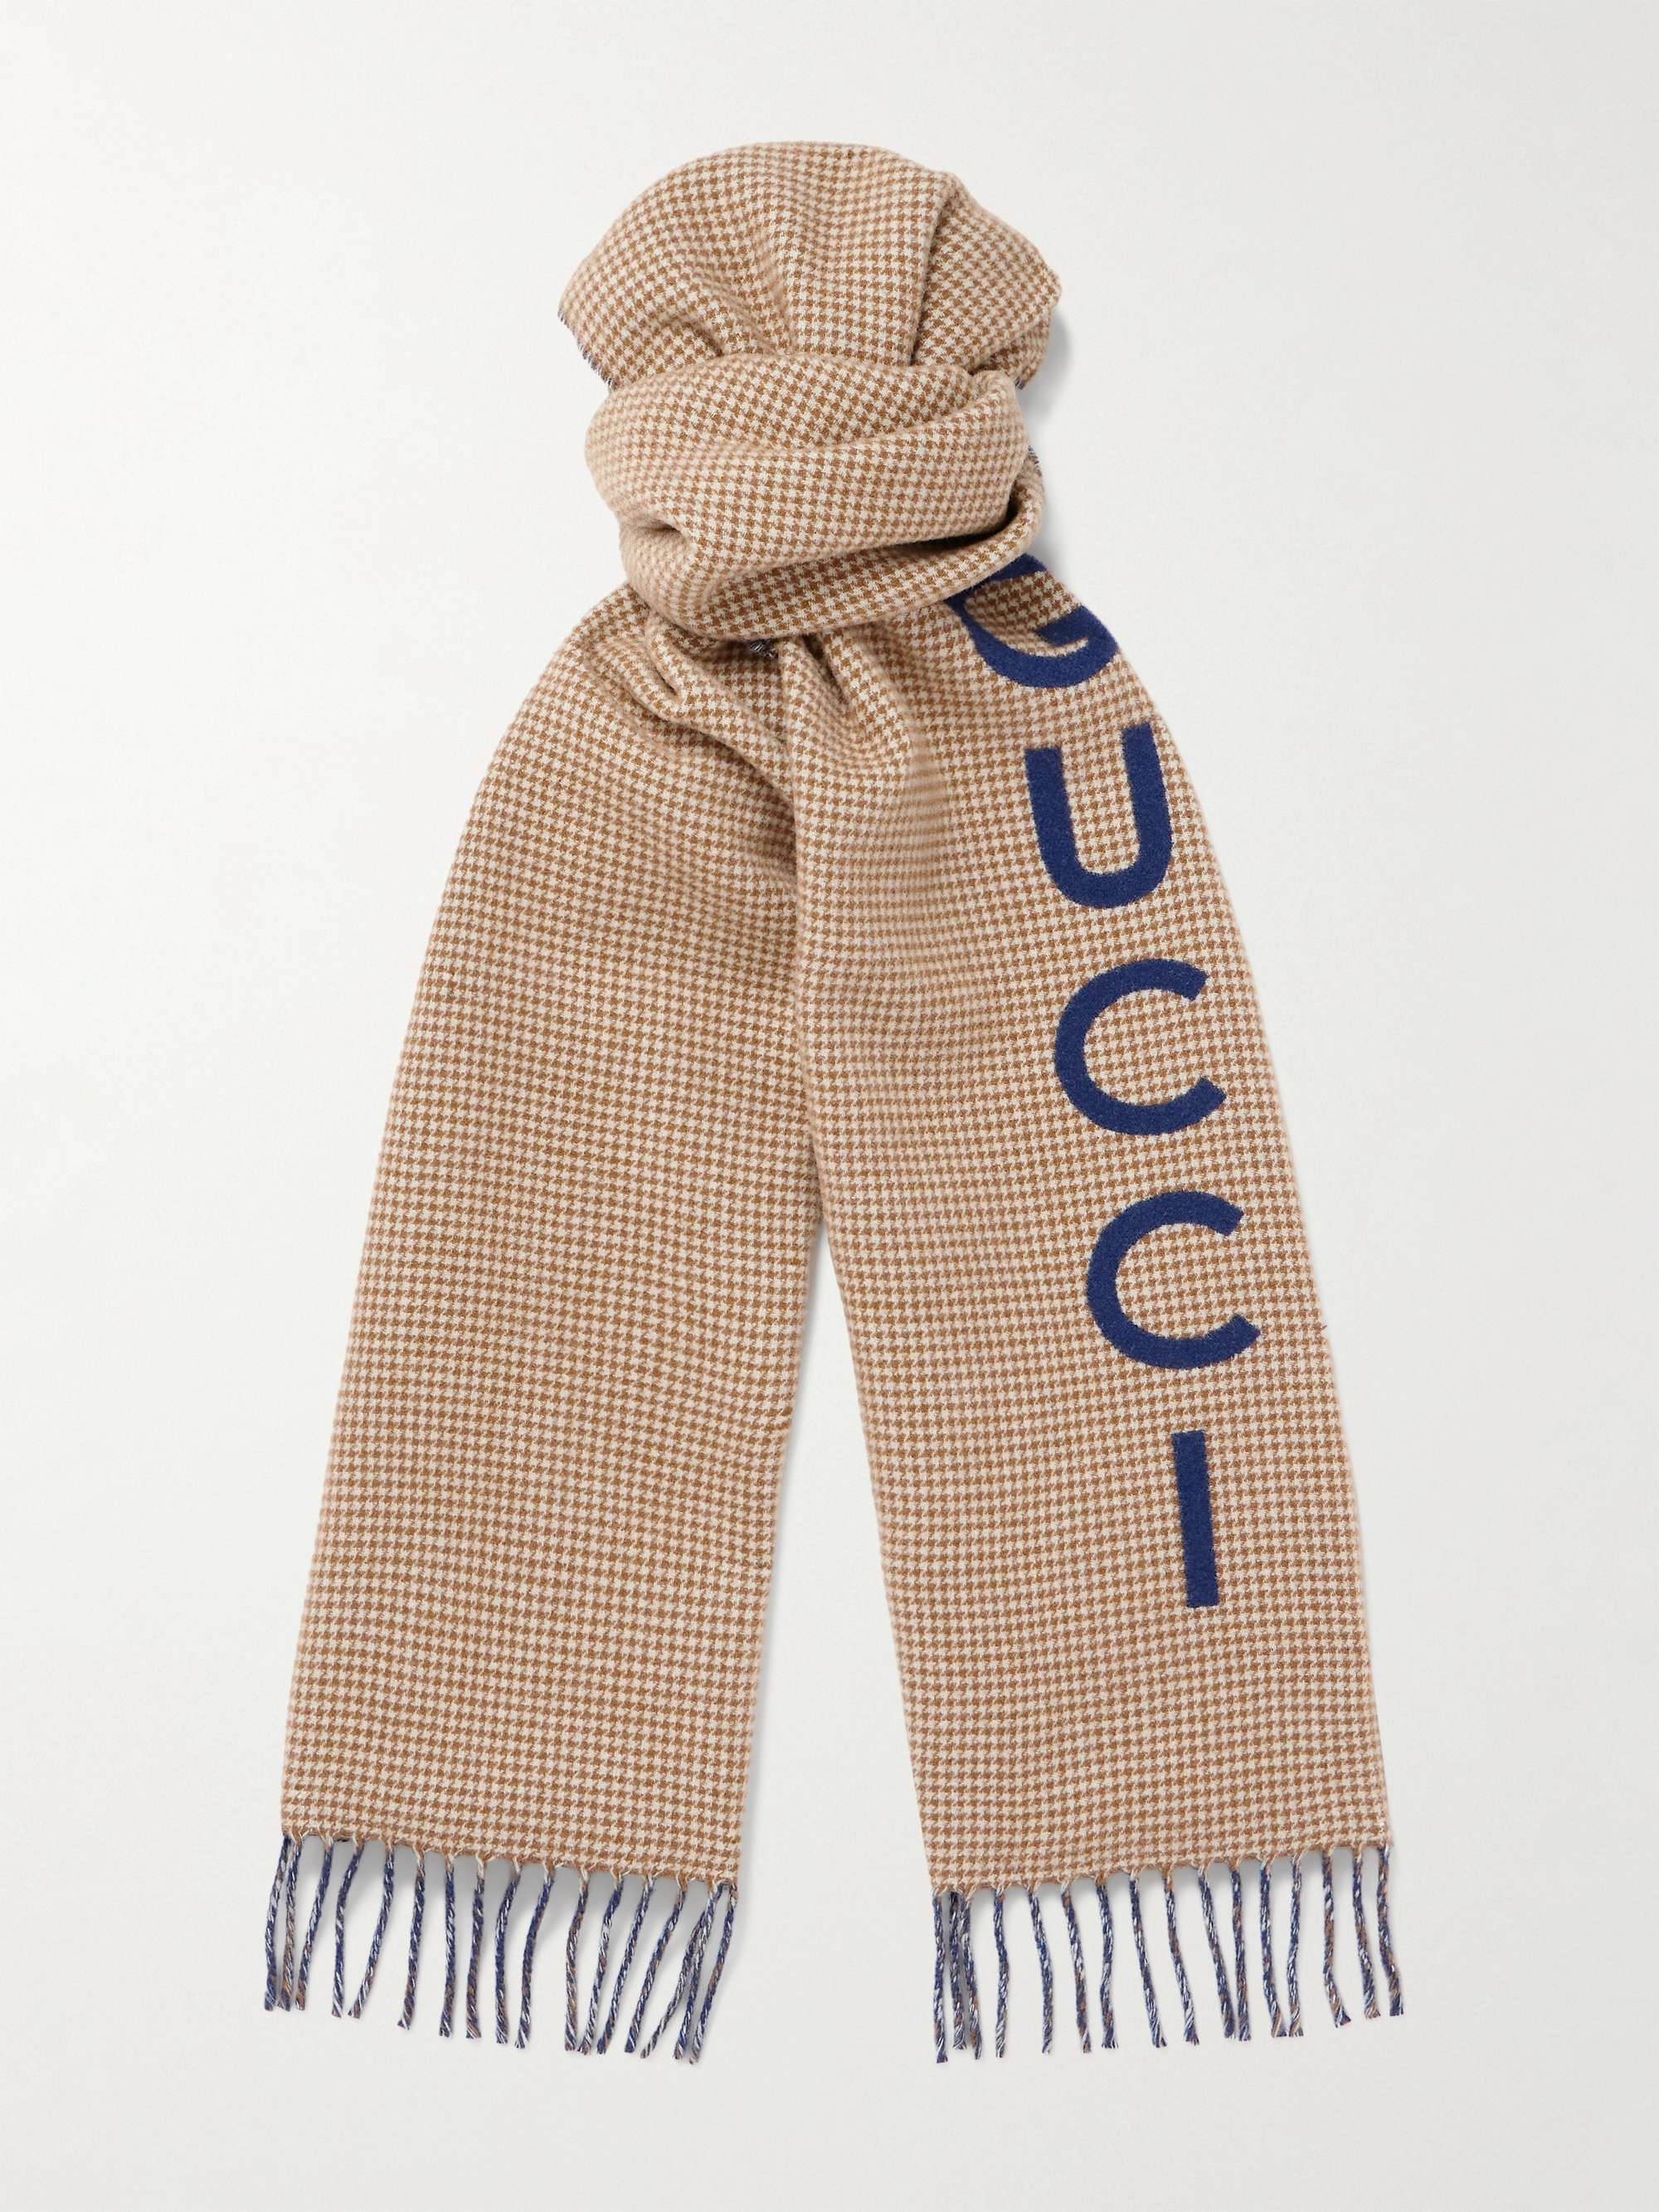 GUCCI Reversible Fringed Logo-Print Houndstooth Wool Scarf,Beige